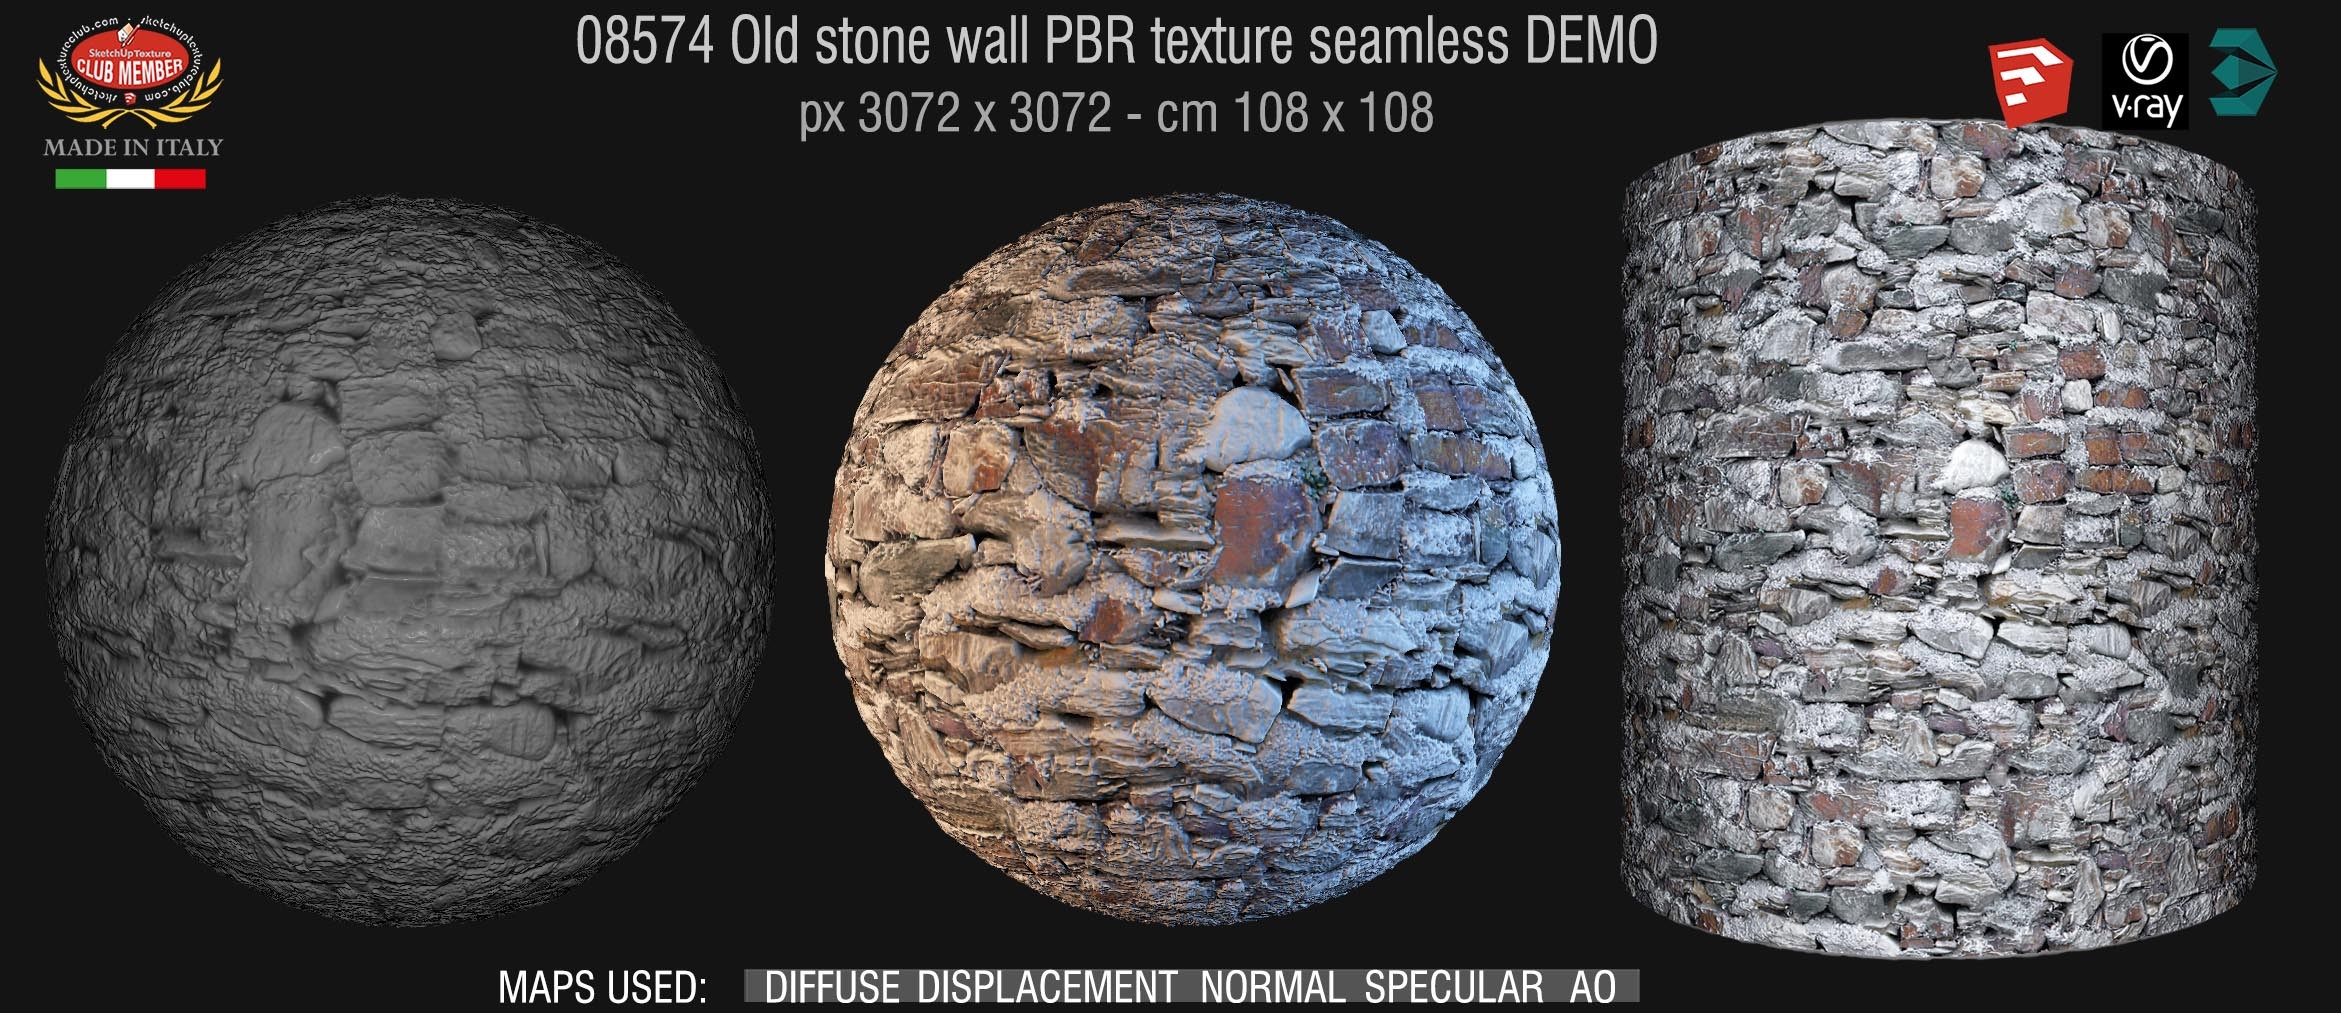 08574 Old stone wall PBR texture seamless DEMO